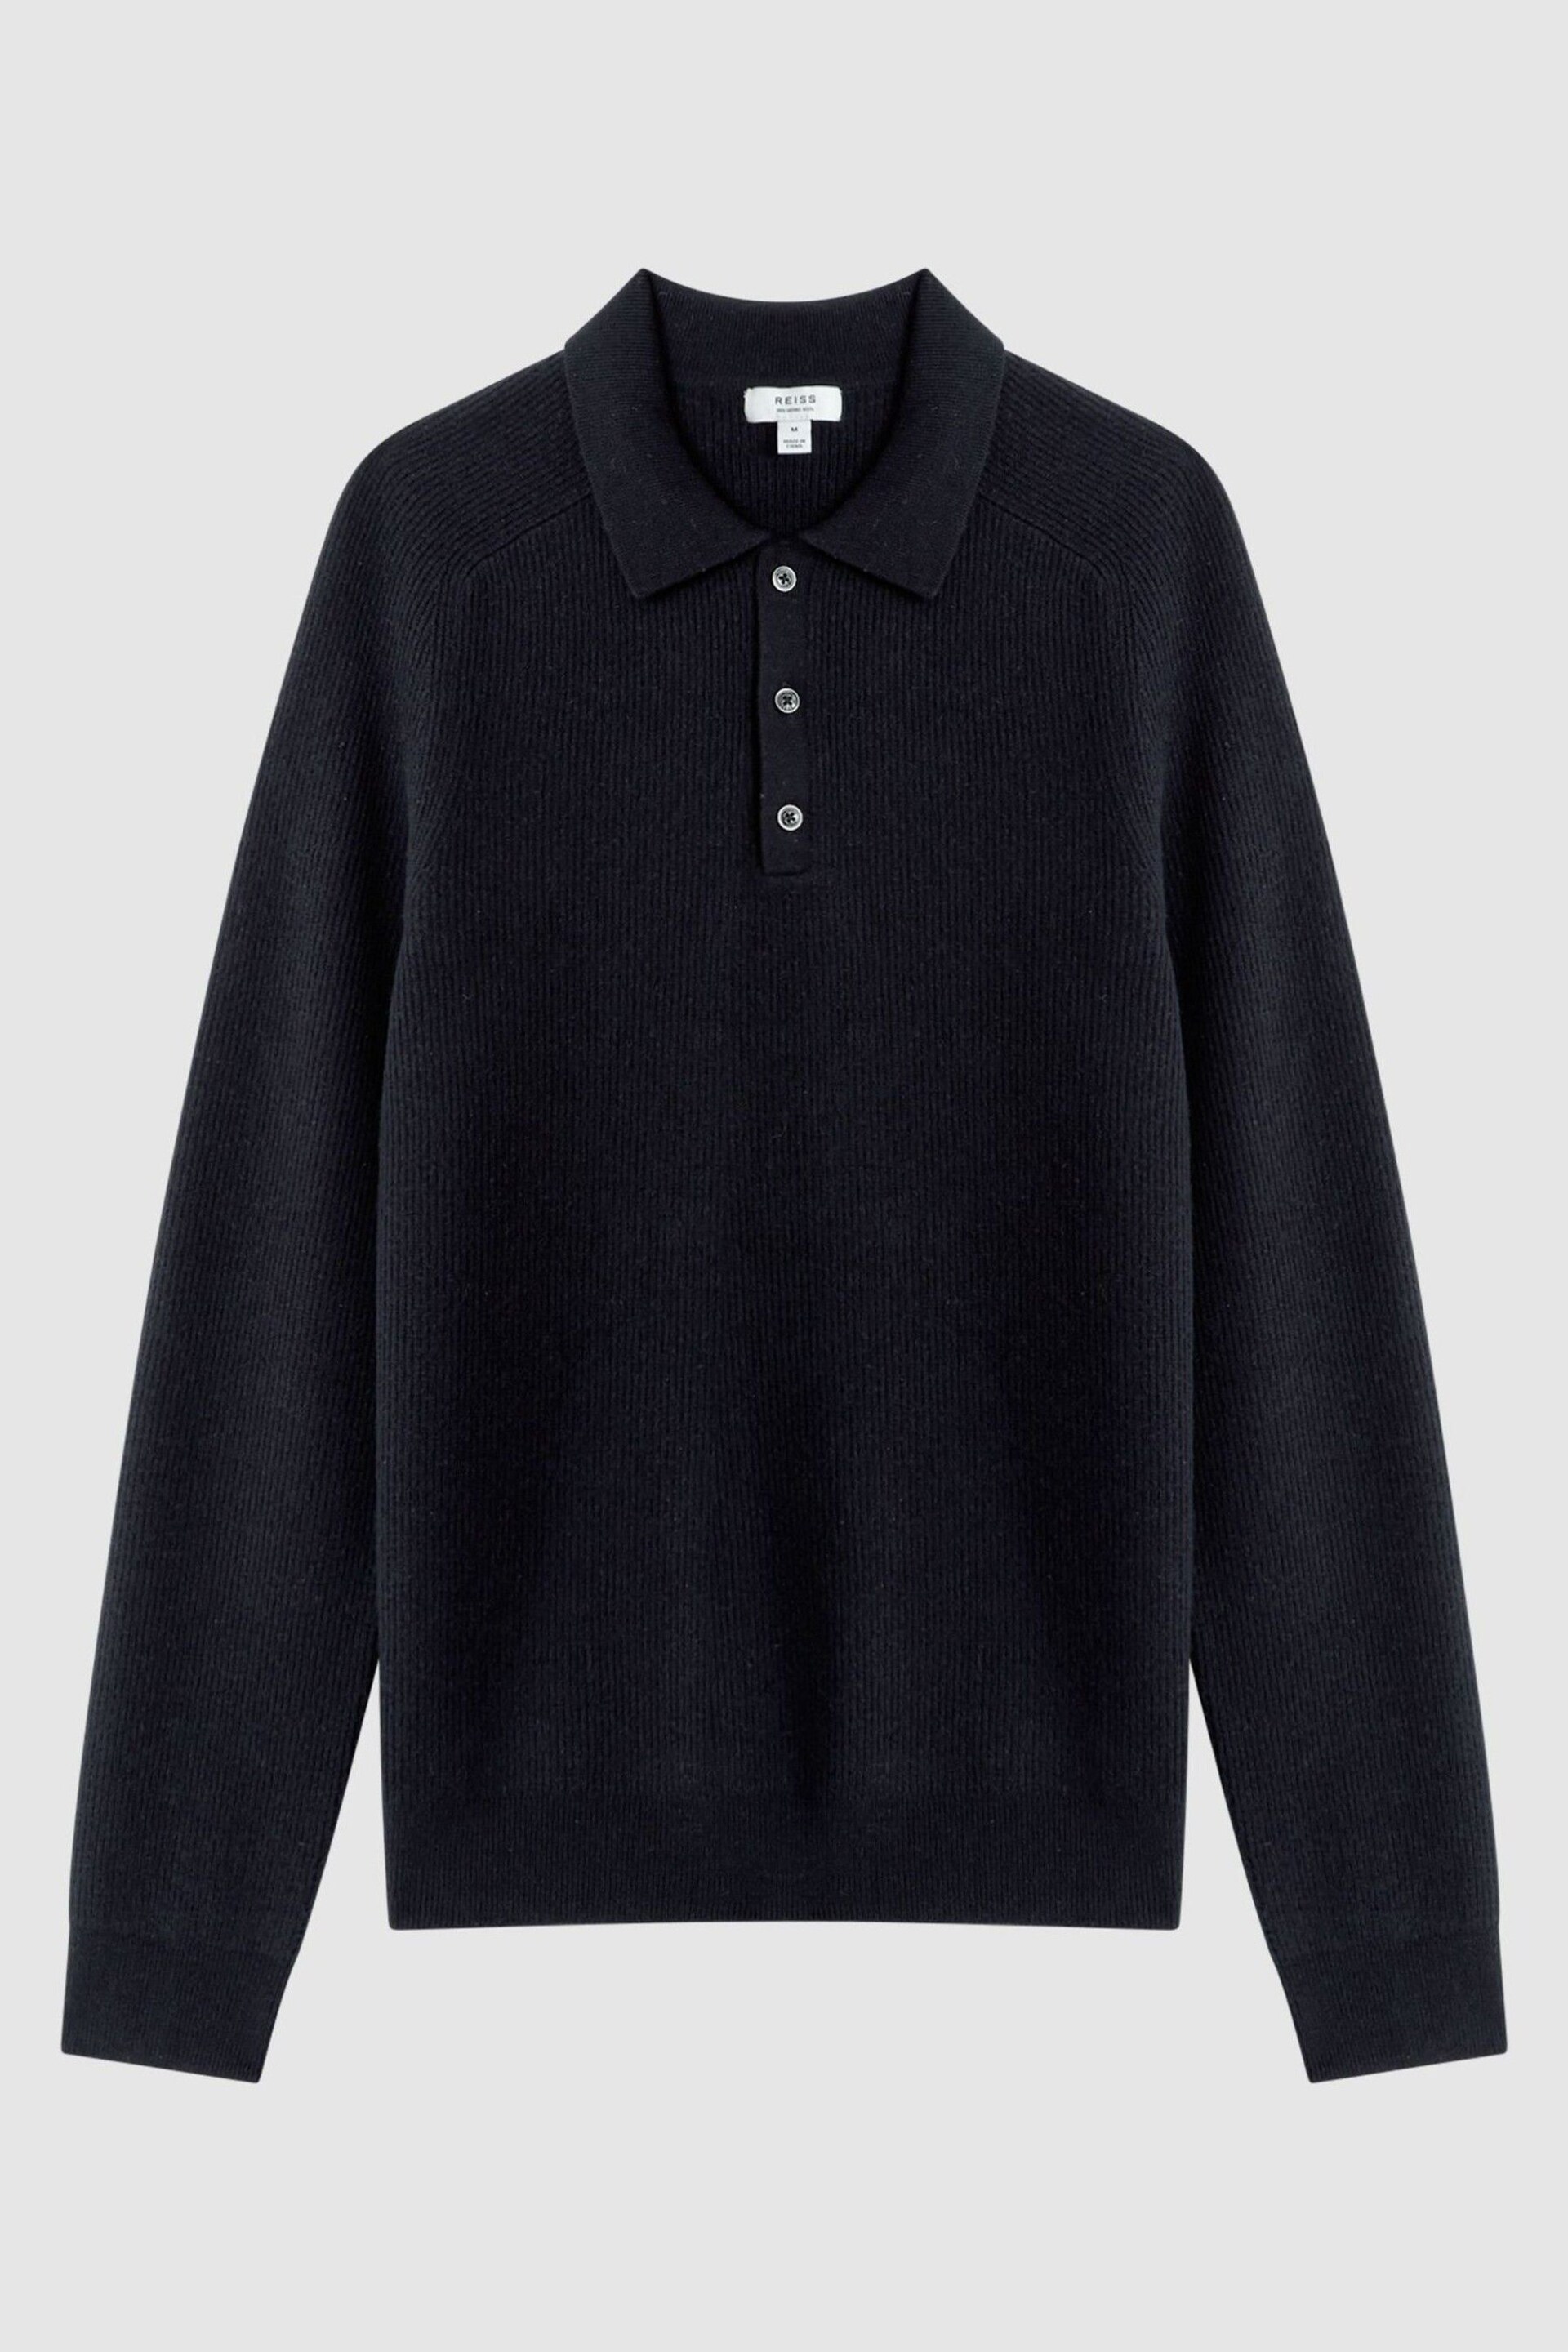 Reiss Navy Holms Wool Long Sleeve Polo Shirt - Image 2 of 5